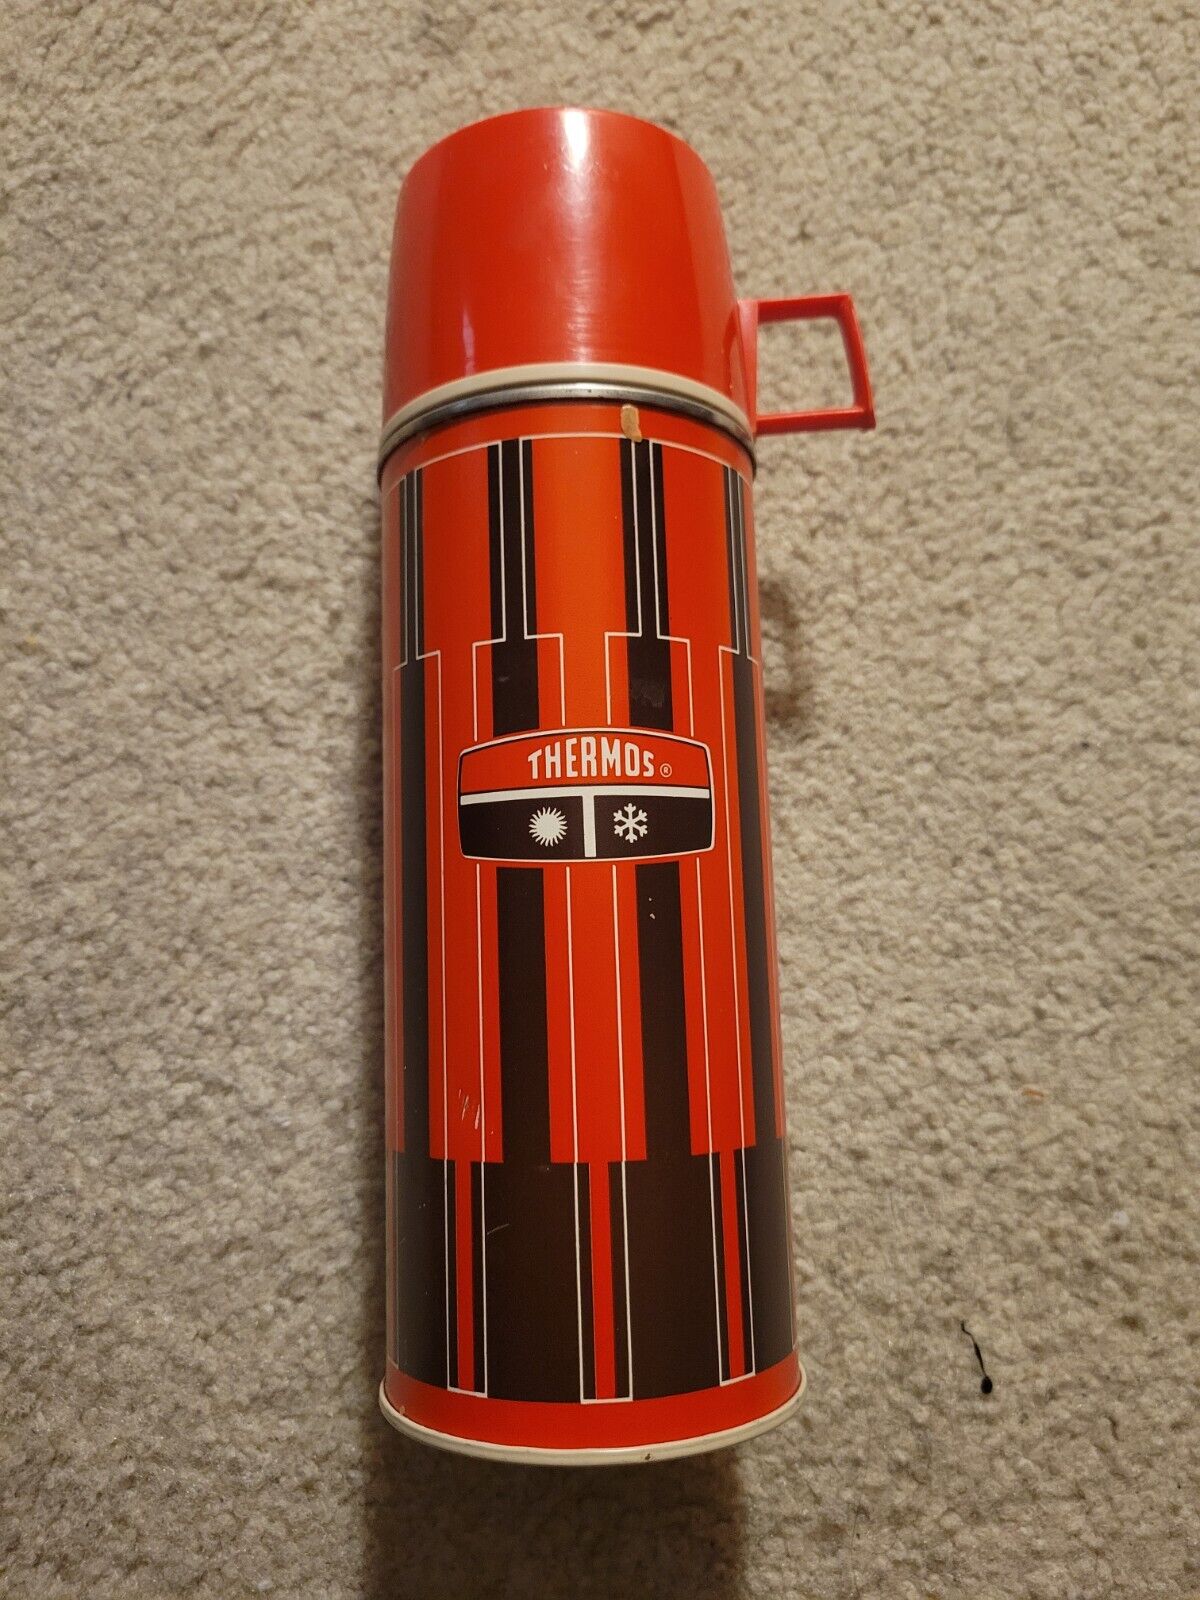 Vintage Thermos 1971 King-Seeley Red and Black Metal Insulated Bottle No. 2210